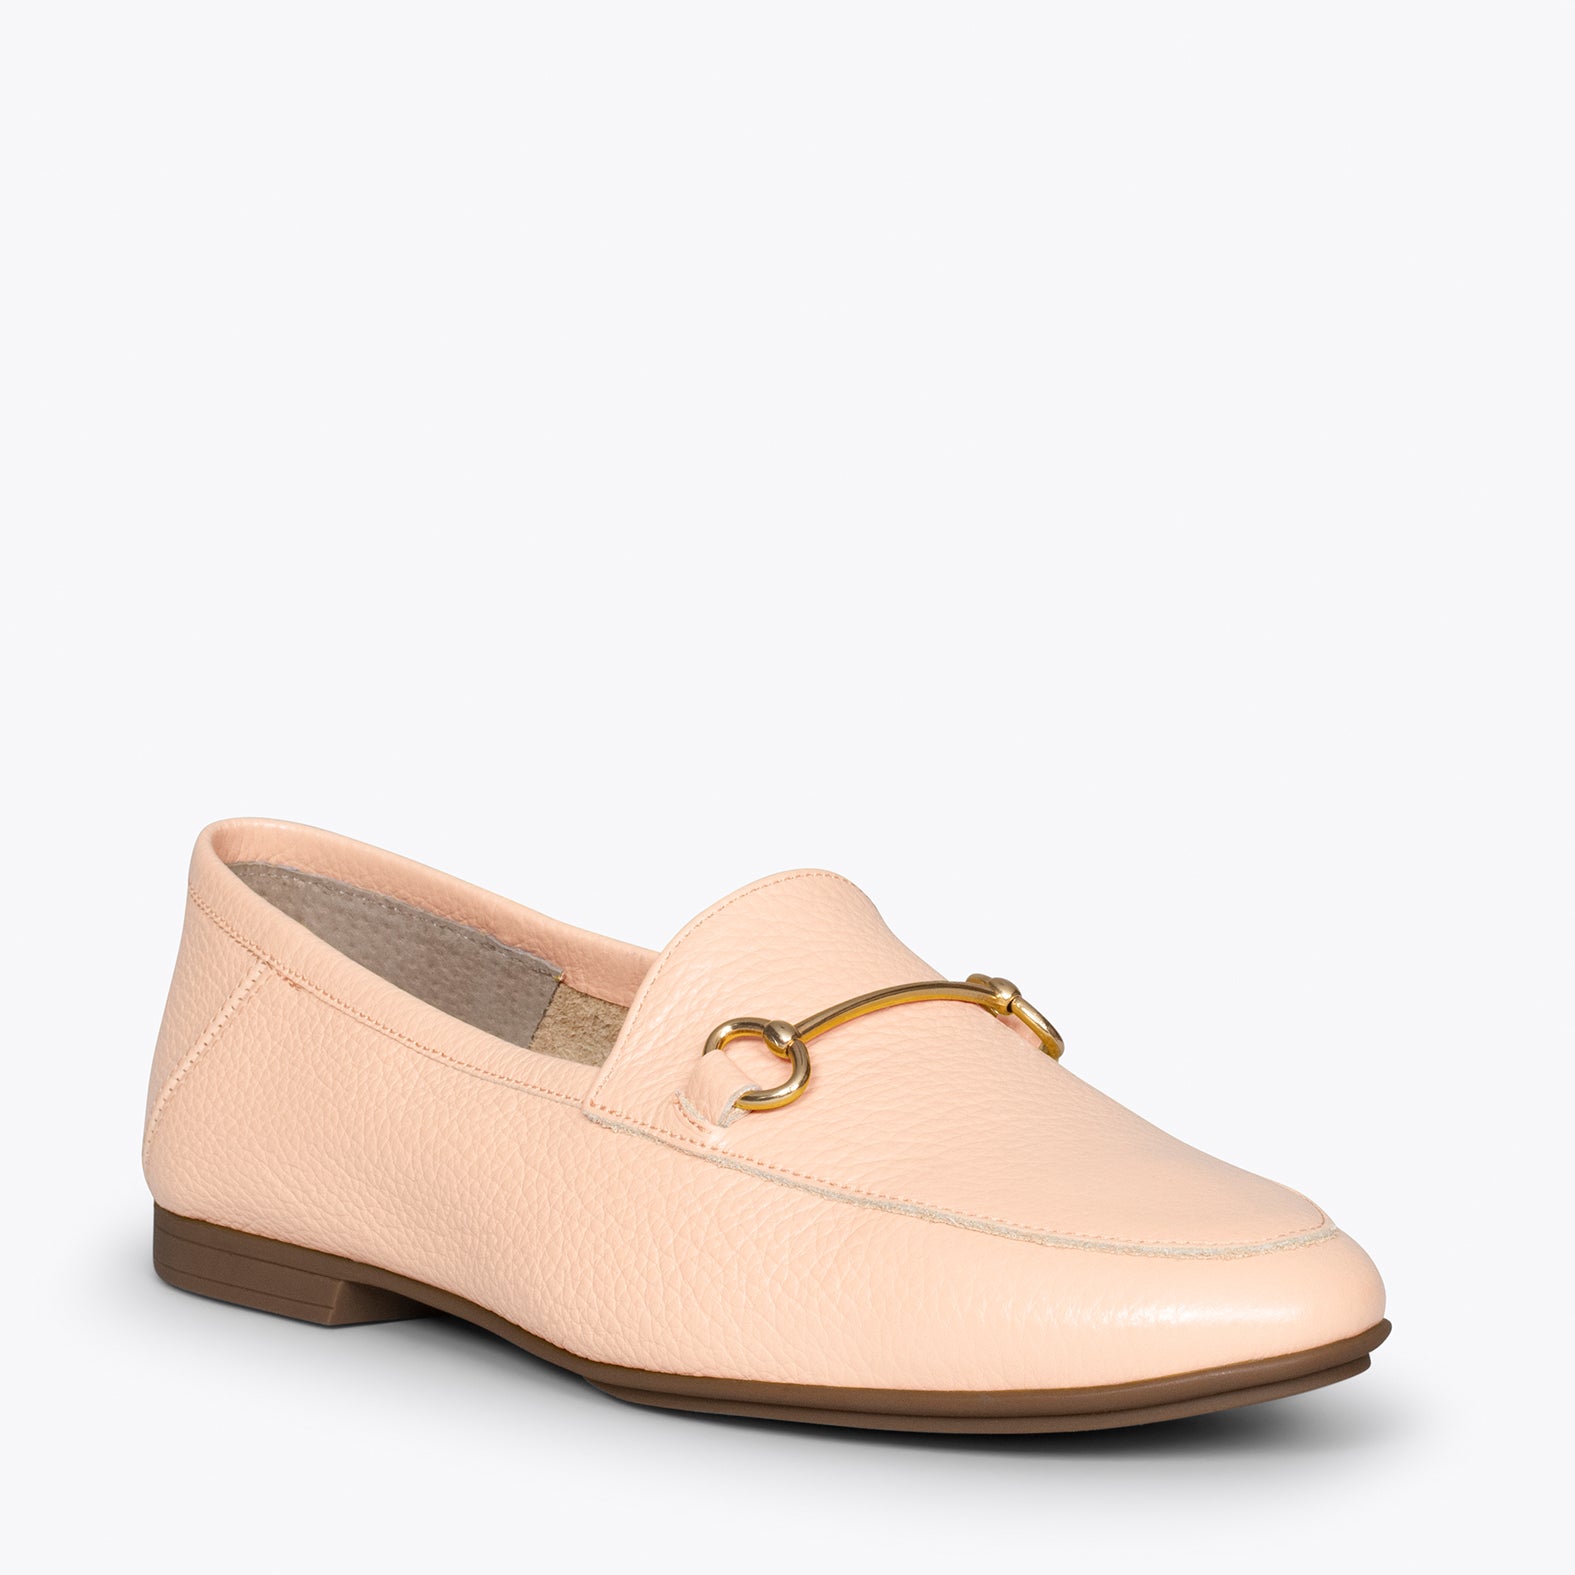 STYLE – NUDE moccasins with horsebit